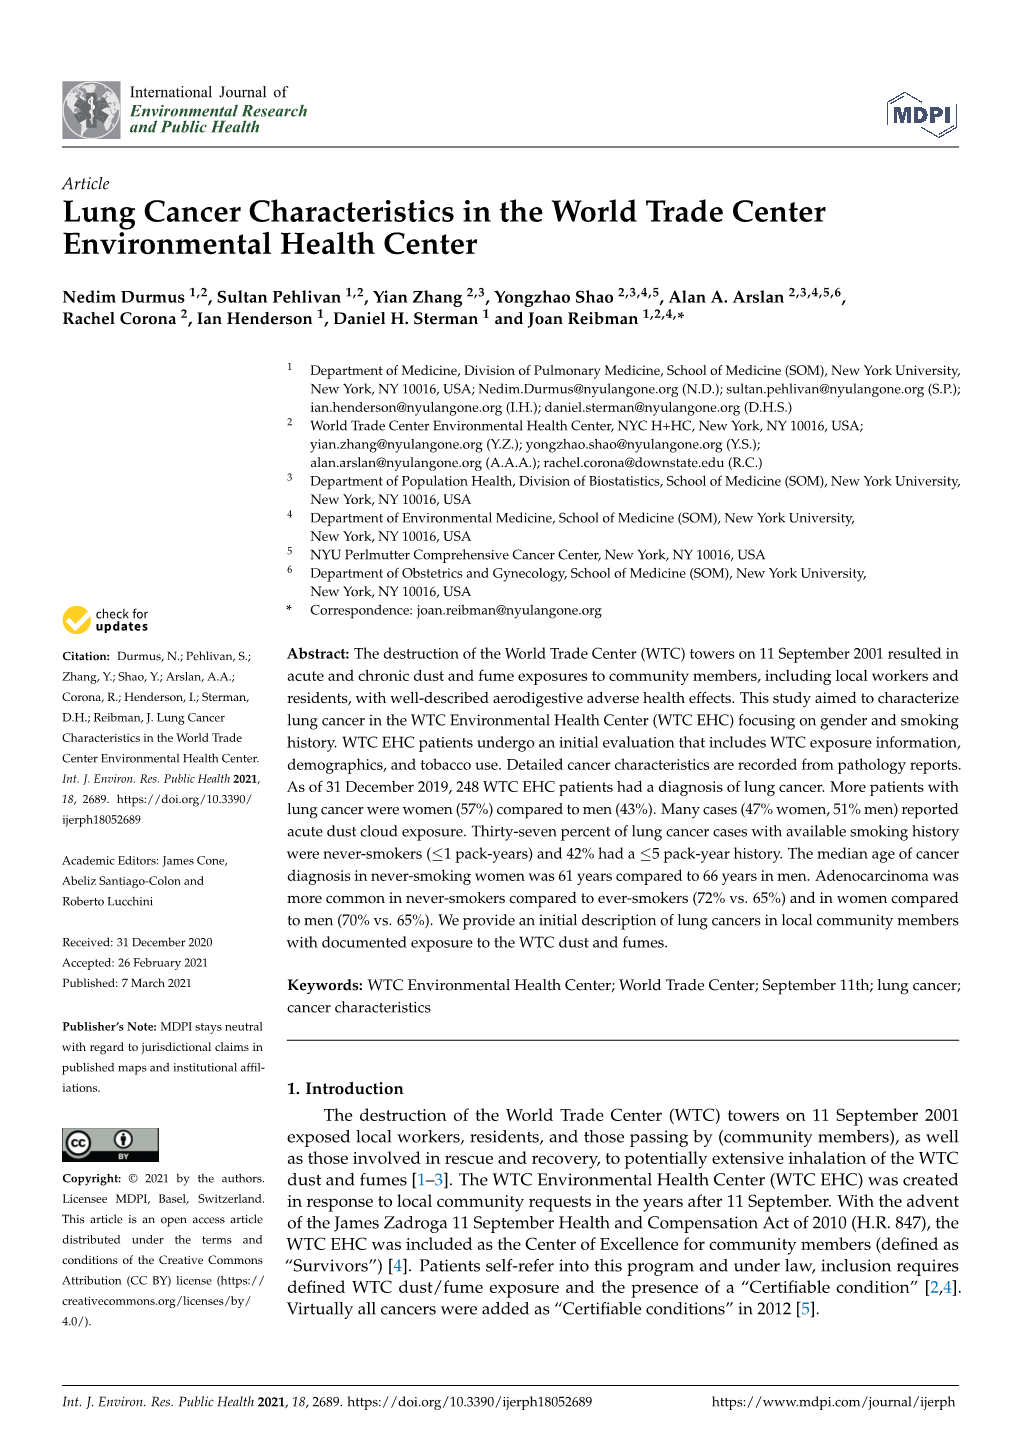 Lung Cancer Characteristics in the World Trade Center Environmental Health Center